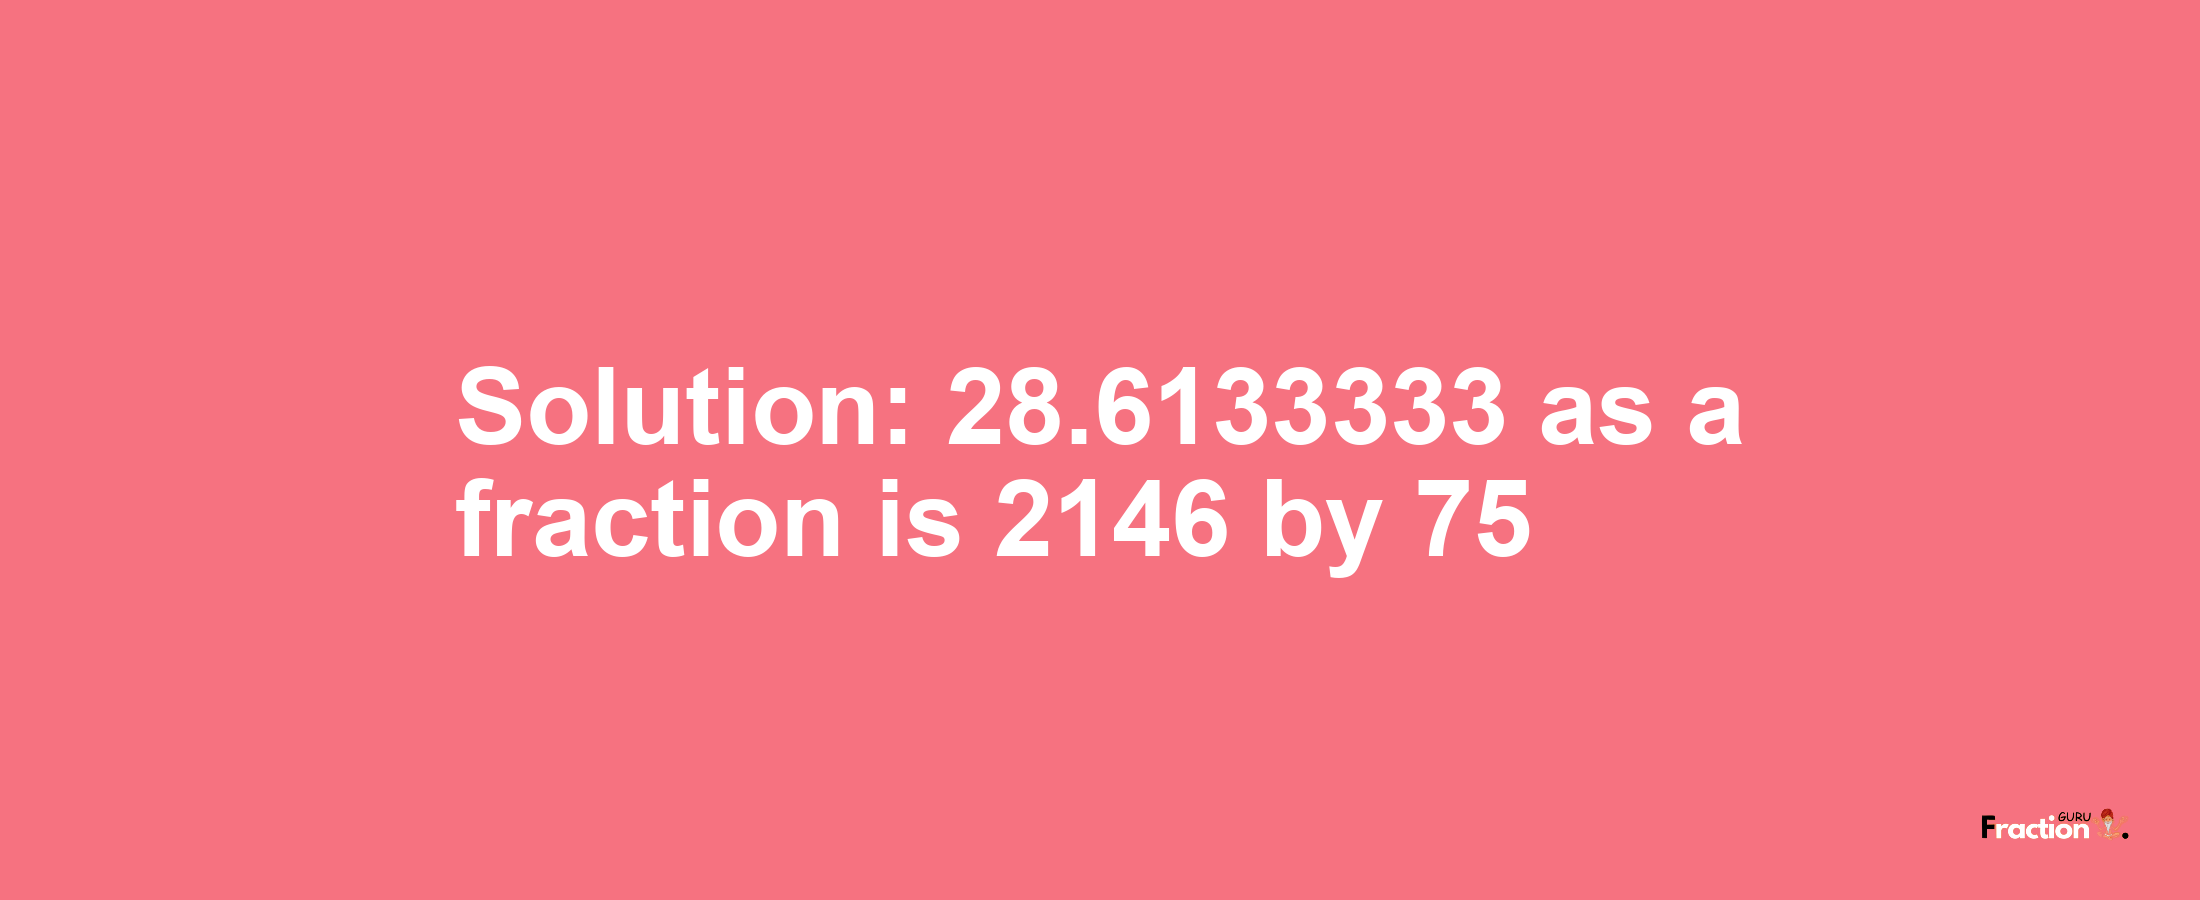 Solution:28.6133333 as a fraction is 2146/75